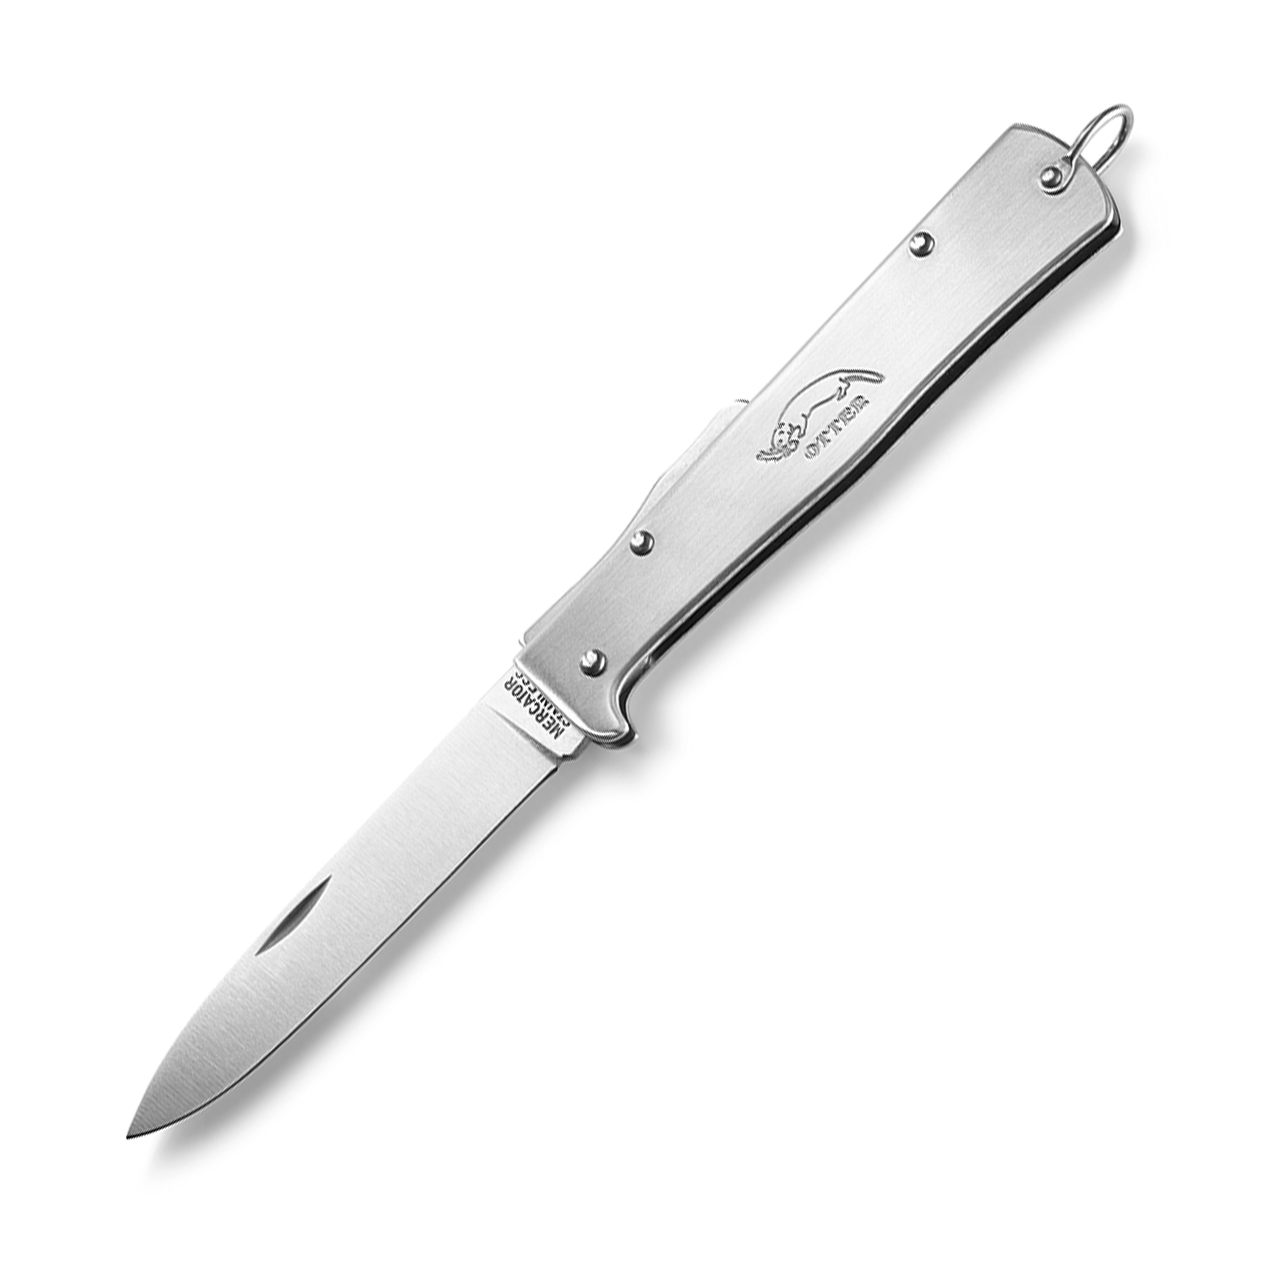 Search Results For: Otter MERCATOR Pocket Knife 10-426 Rg RK CAT -   Israel